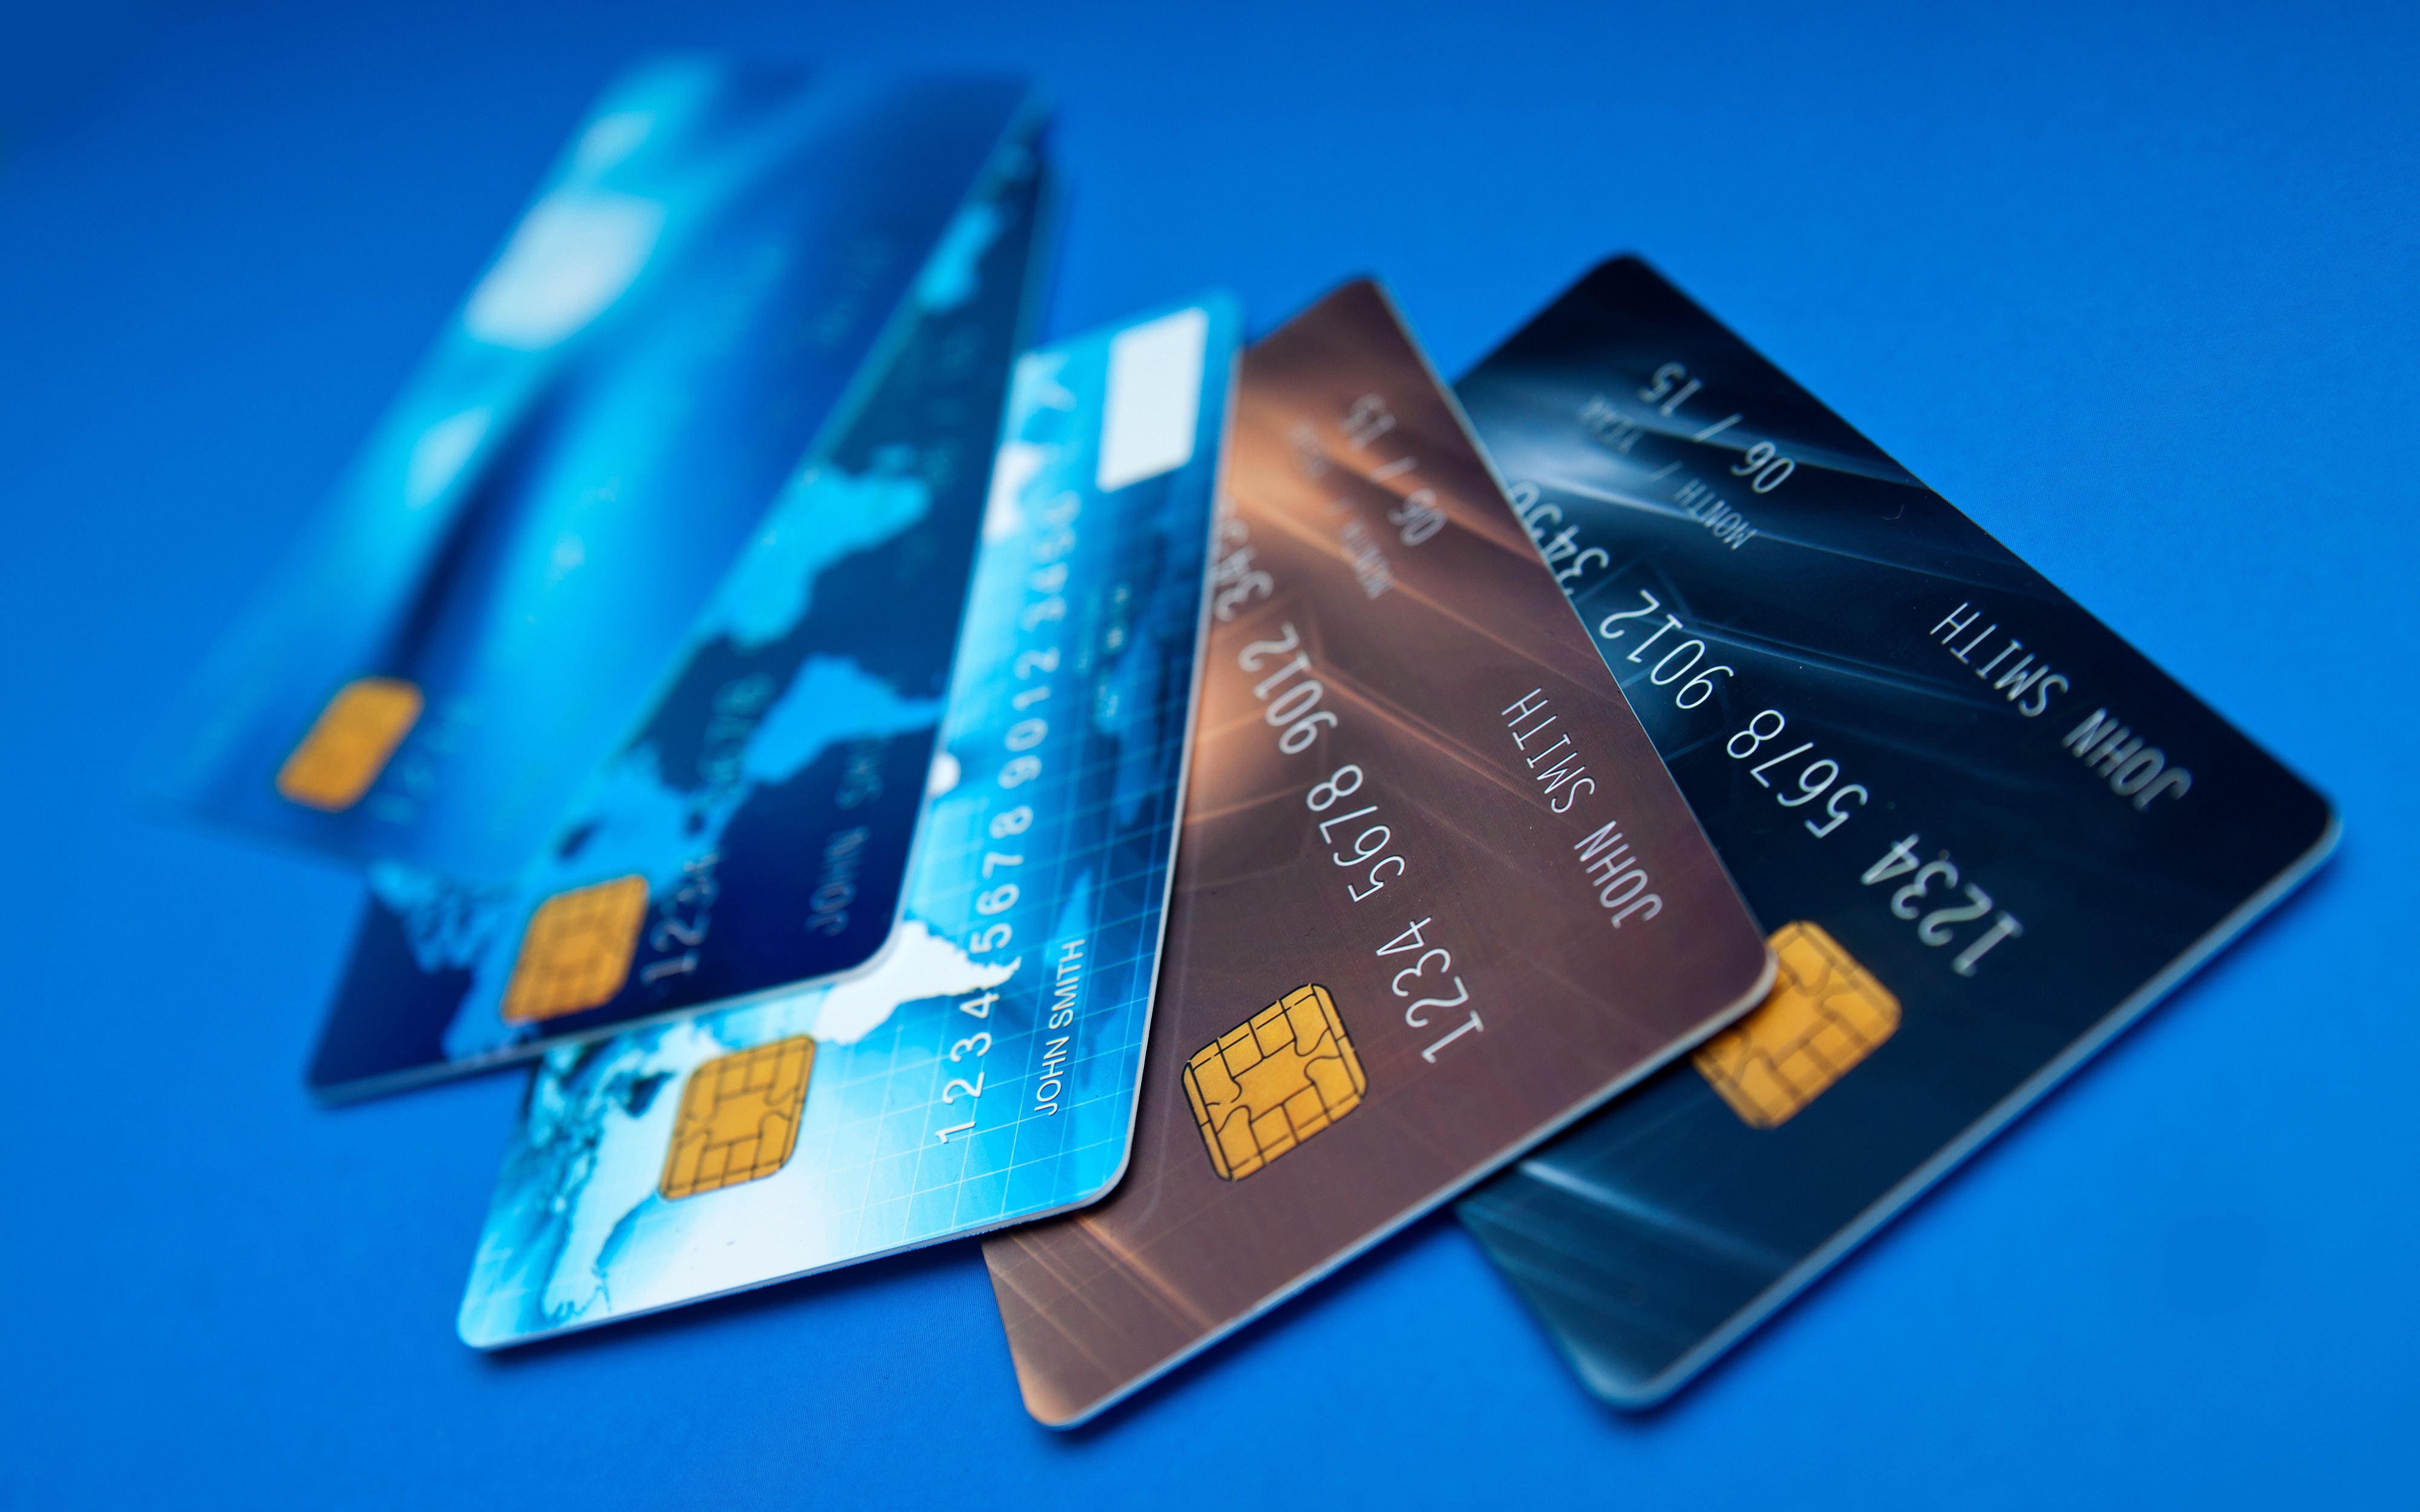 The Complete Guide To Prepaid Cards